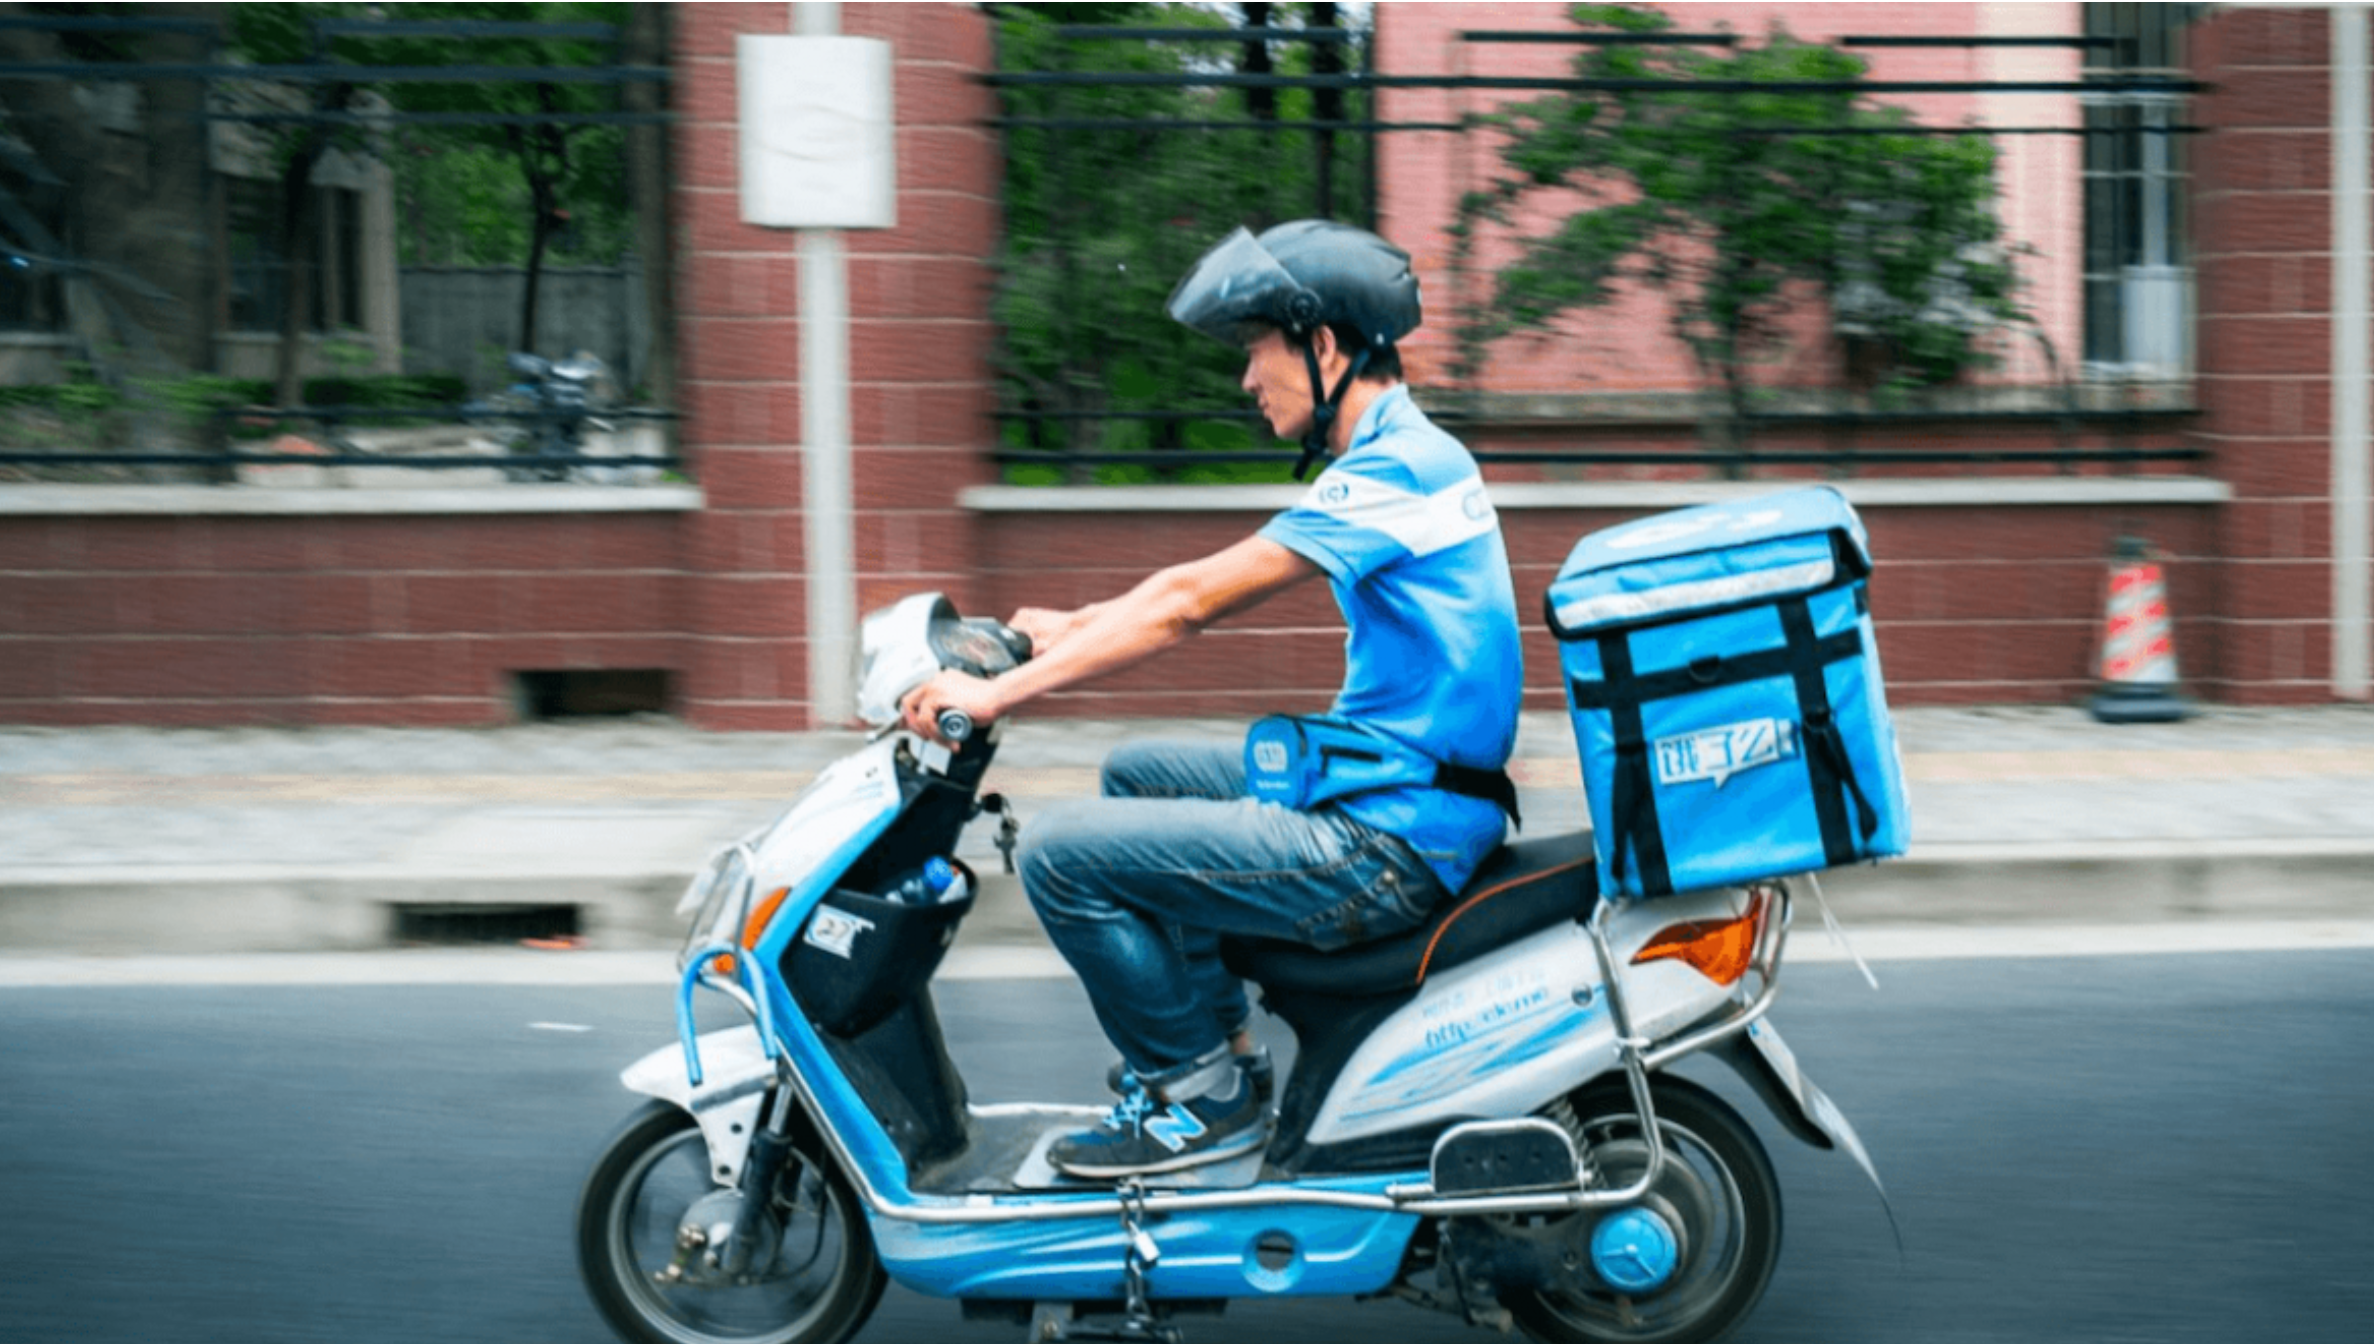 Delivery worker deaths in China expose injustices in third-party contracting